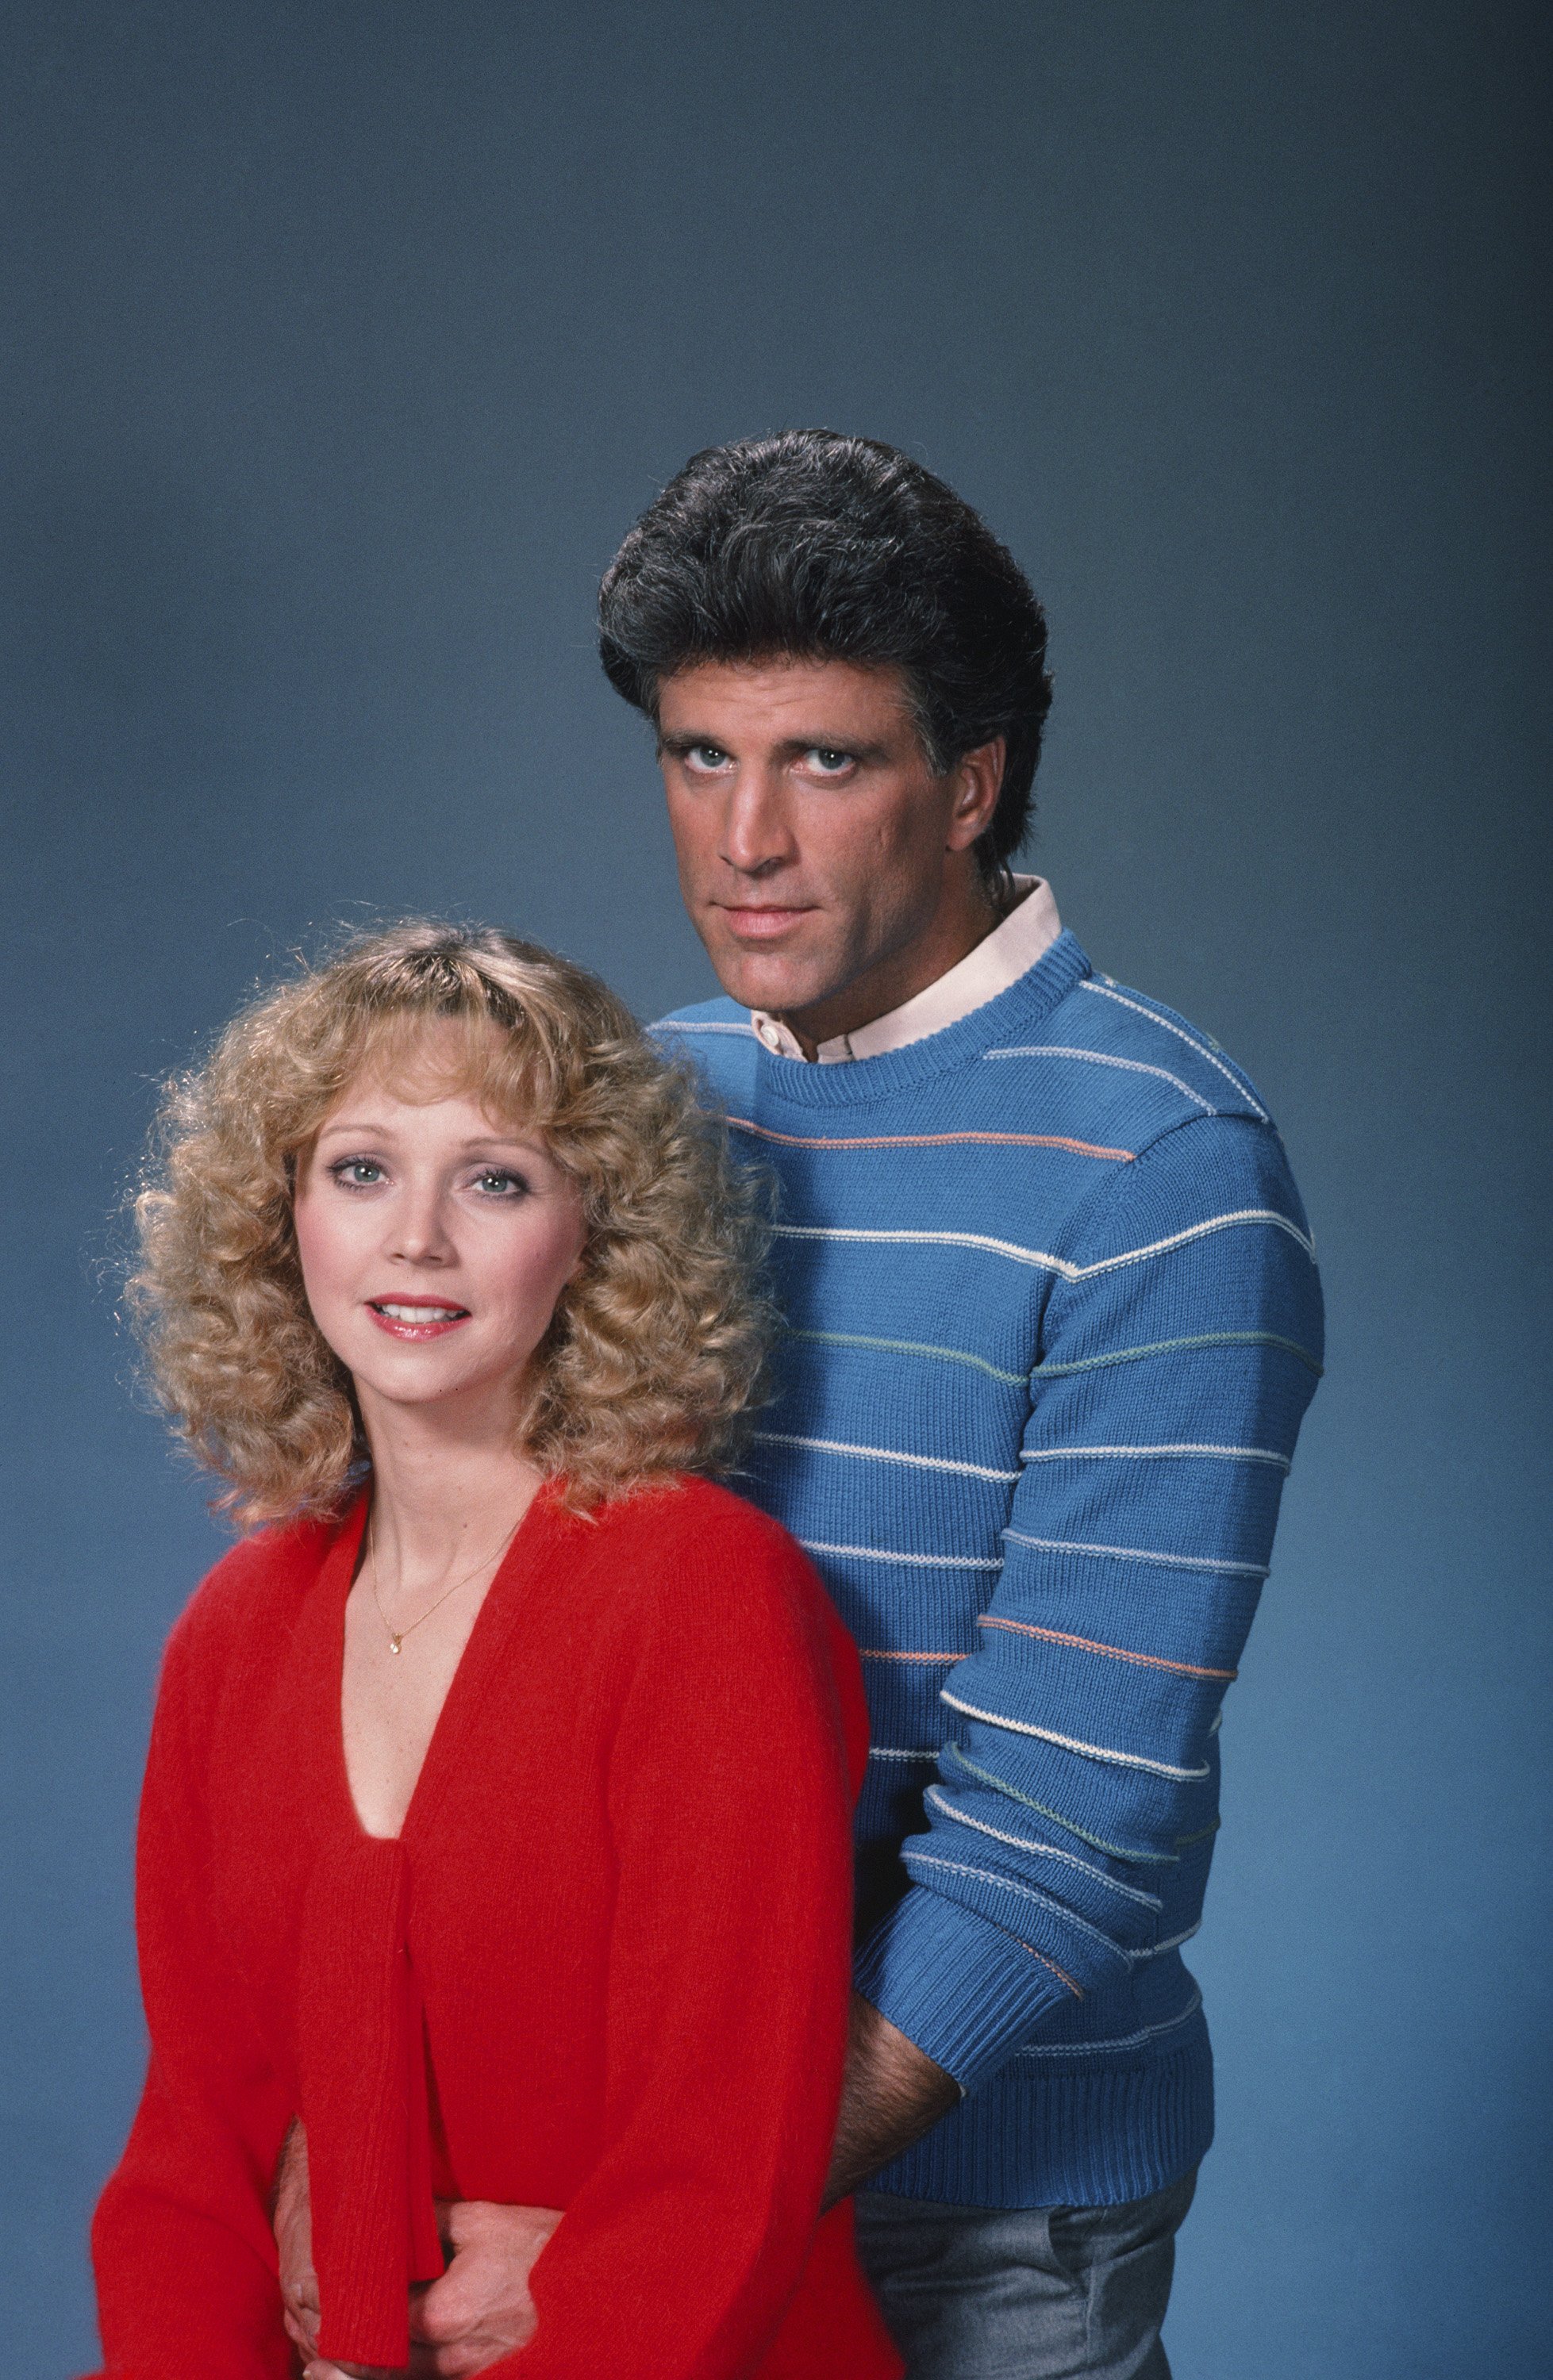 Shelley Long as Diane Chambers and Ted Danson as Sam Malone in "Cheers" I Source: Getty Images